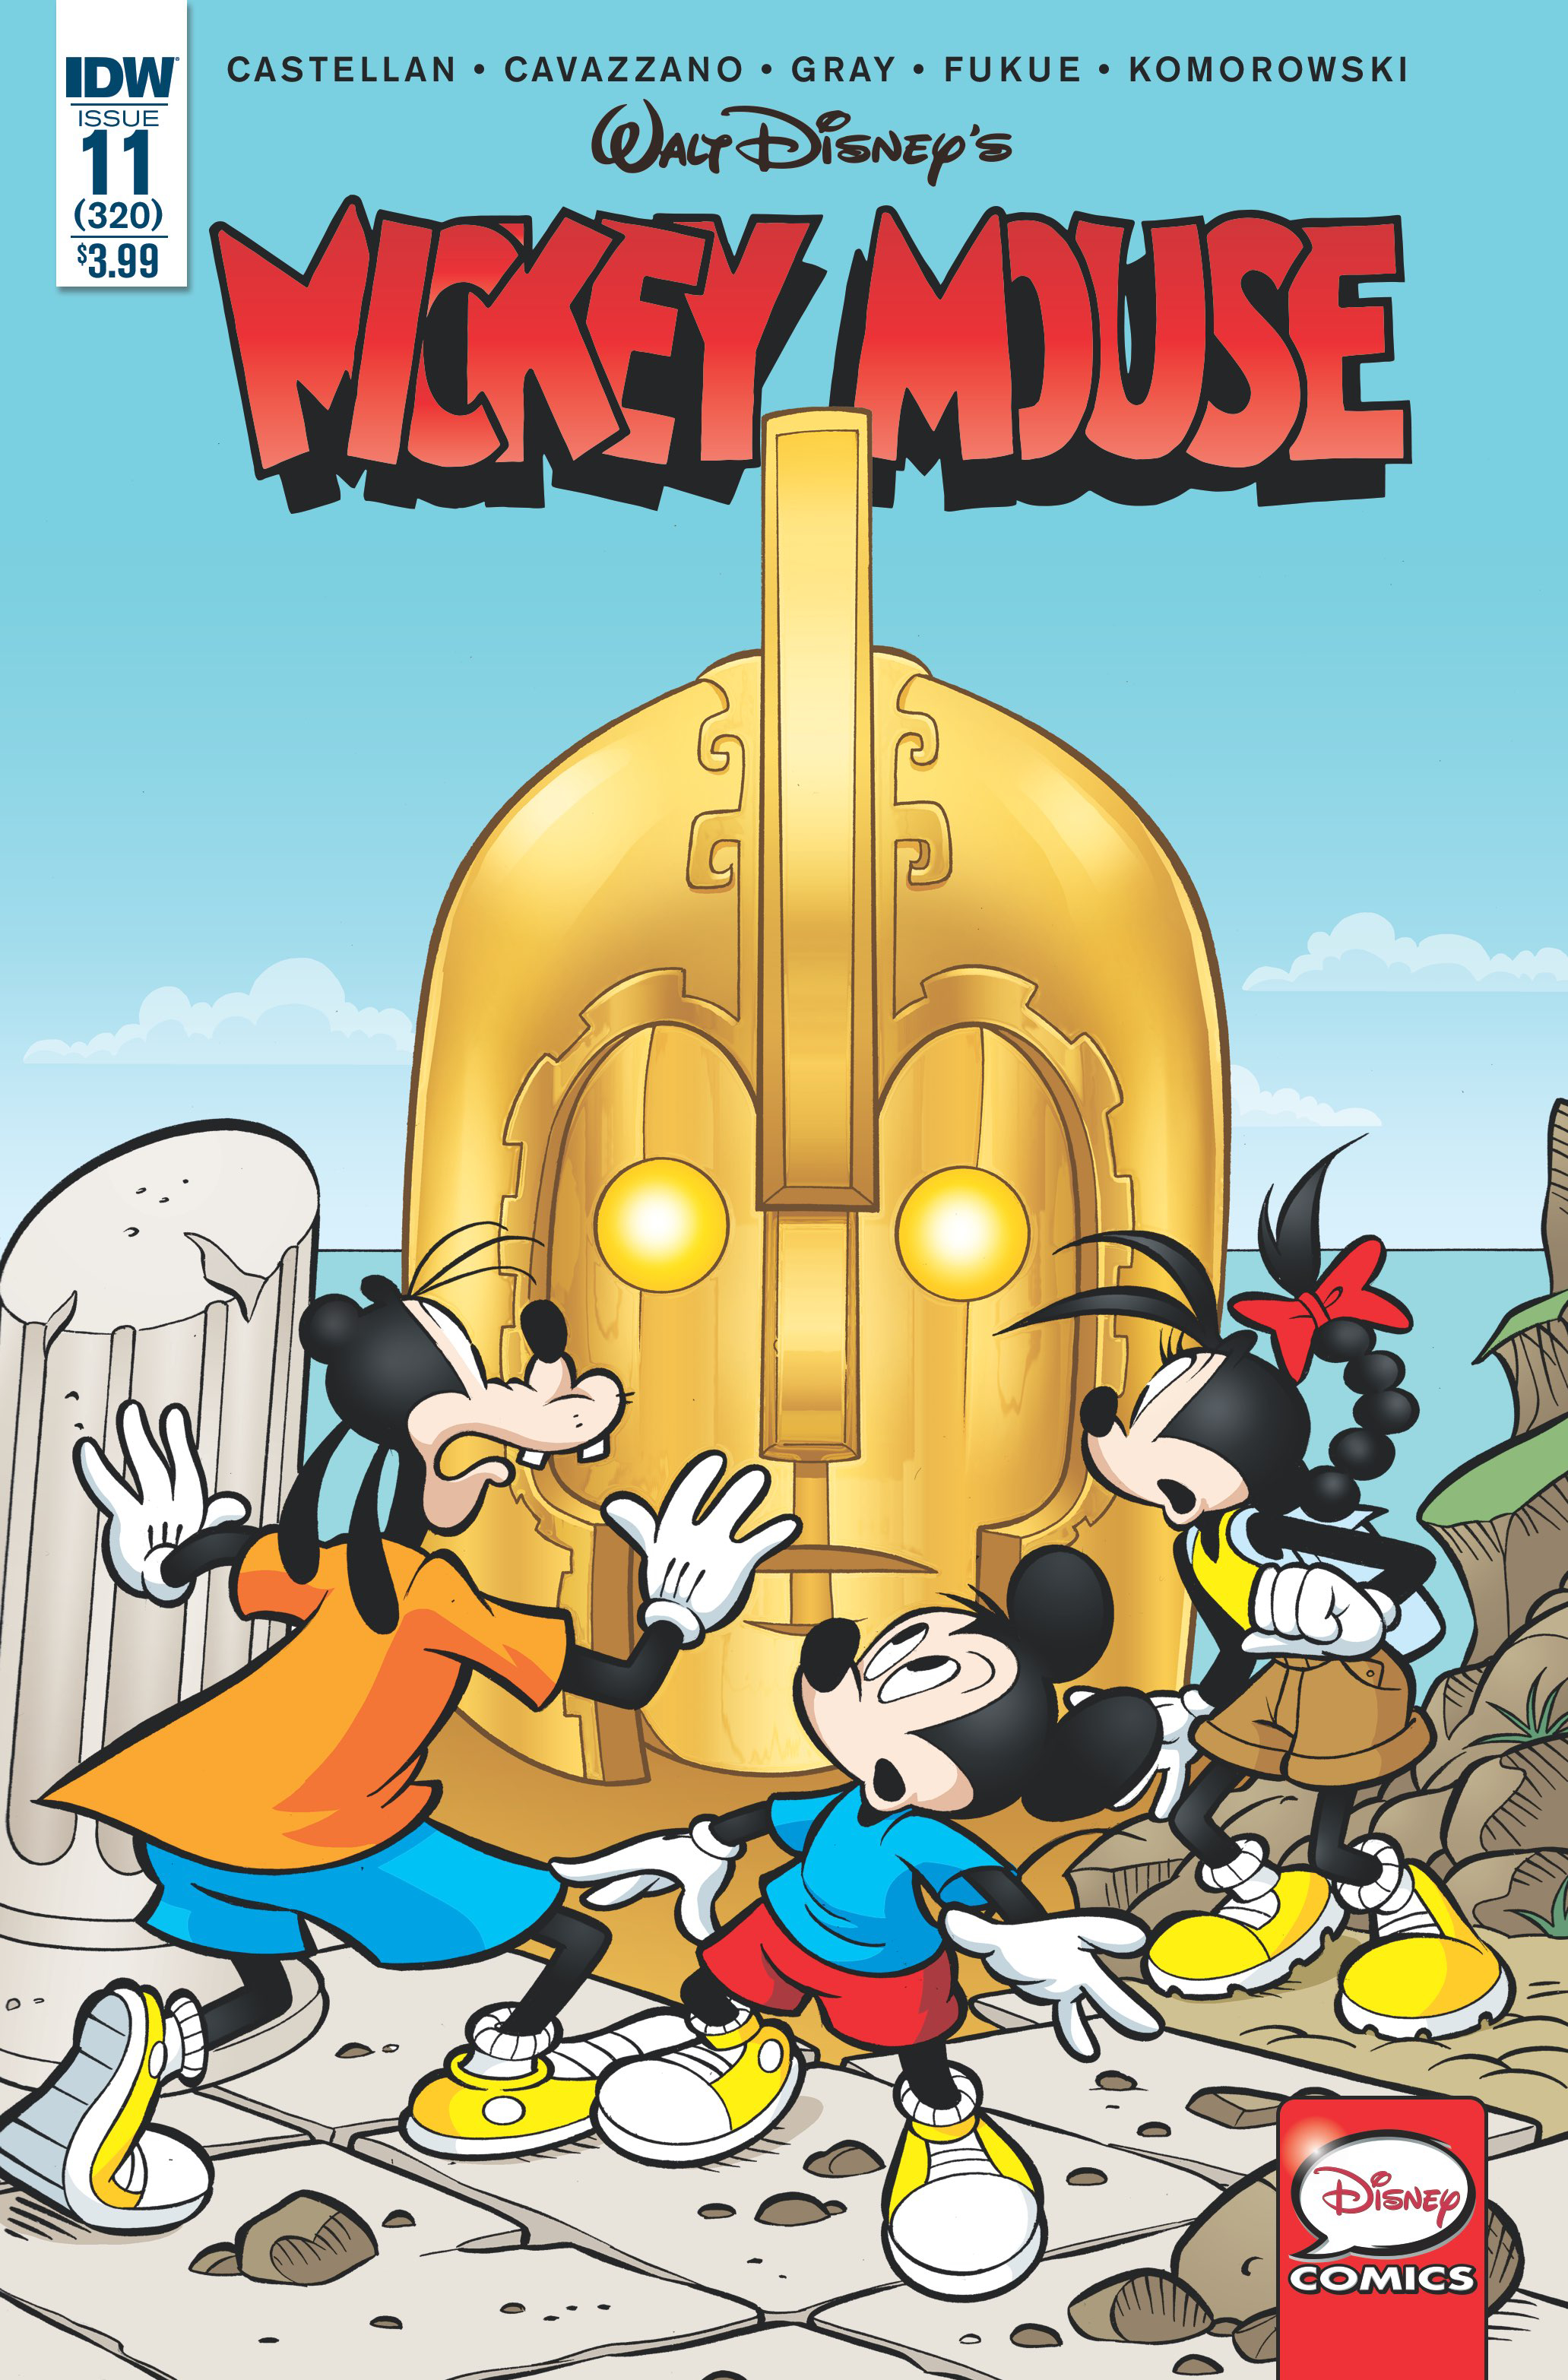 MICKEY MOUSE #11